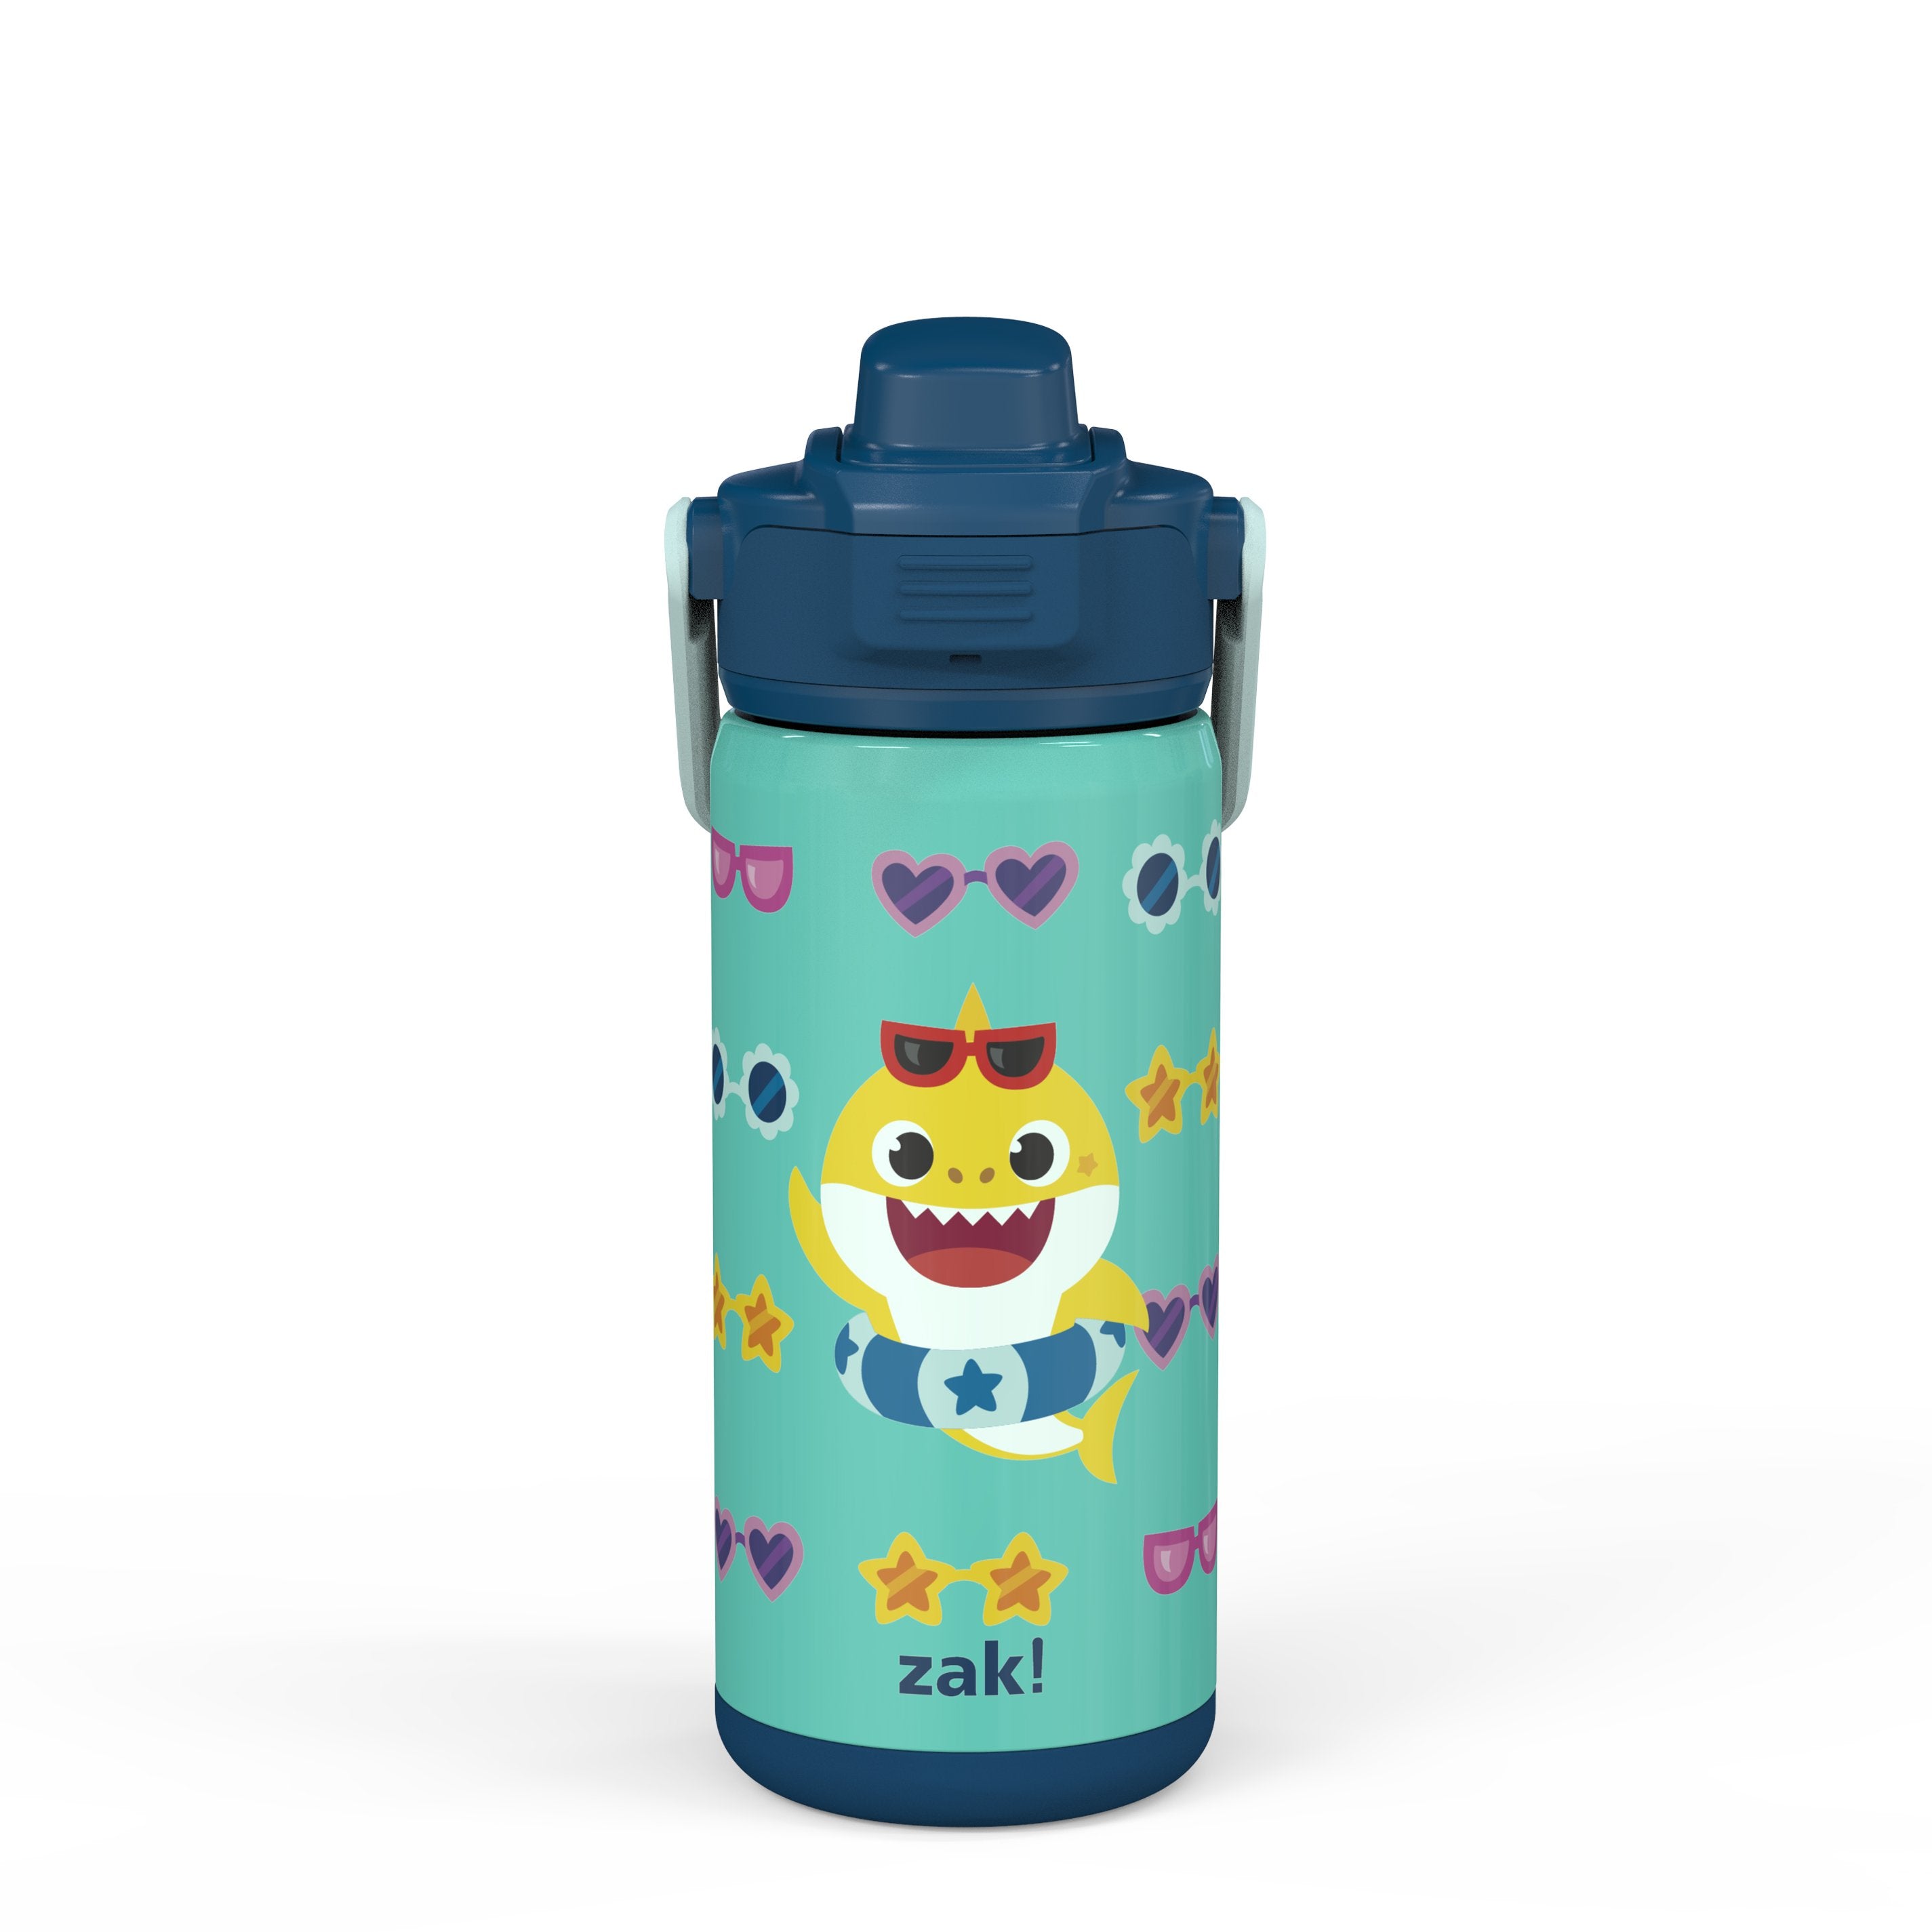 Baby Shark Beacon Stainless Steel Insulated Kids Water Bottle with Covered Spout, 14 Ounces